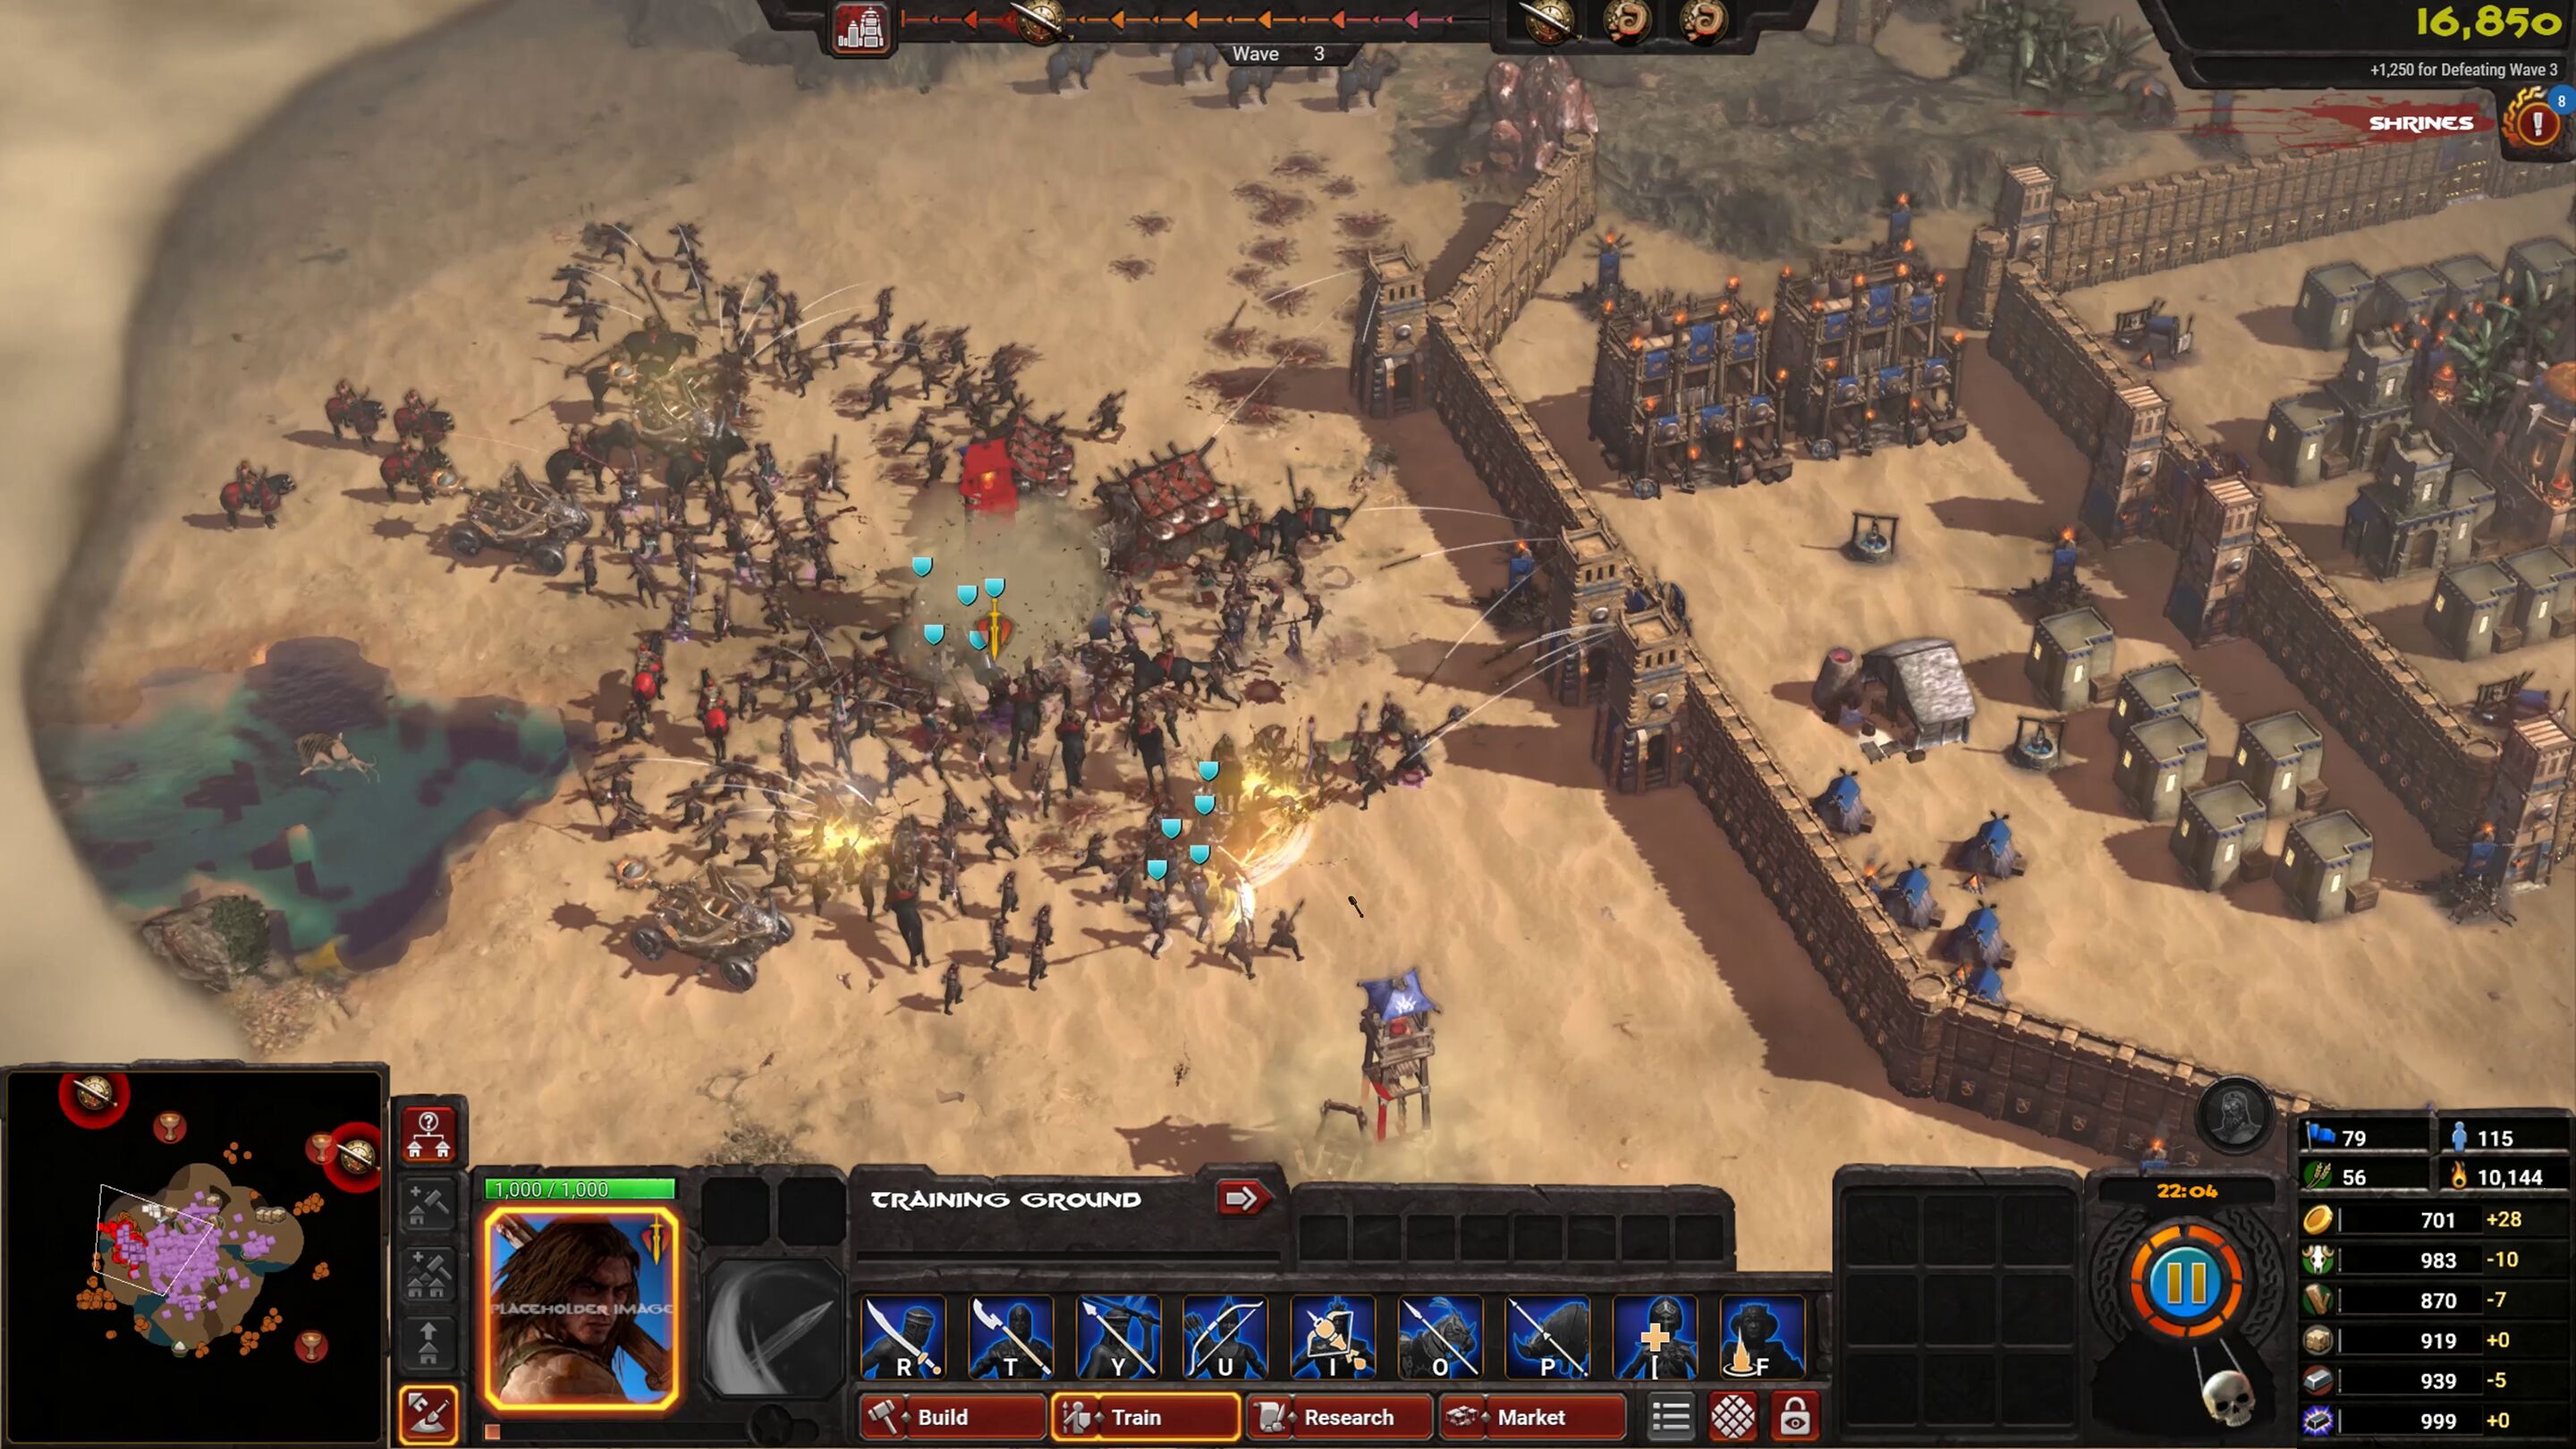 Fun coop sets Conan Unconquered apart from other survival RTS games